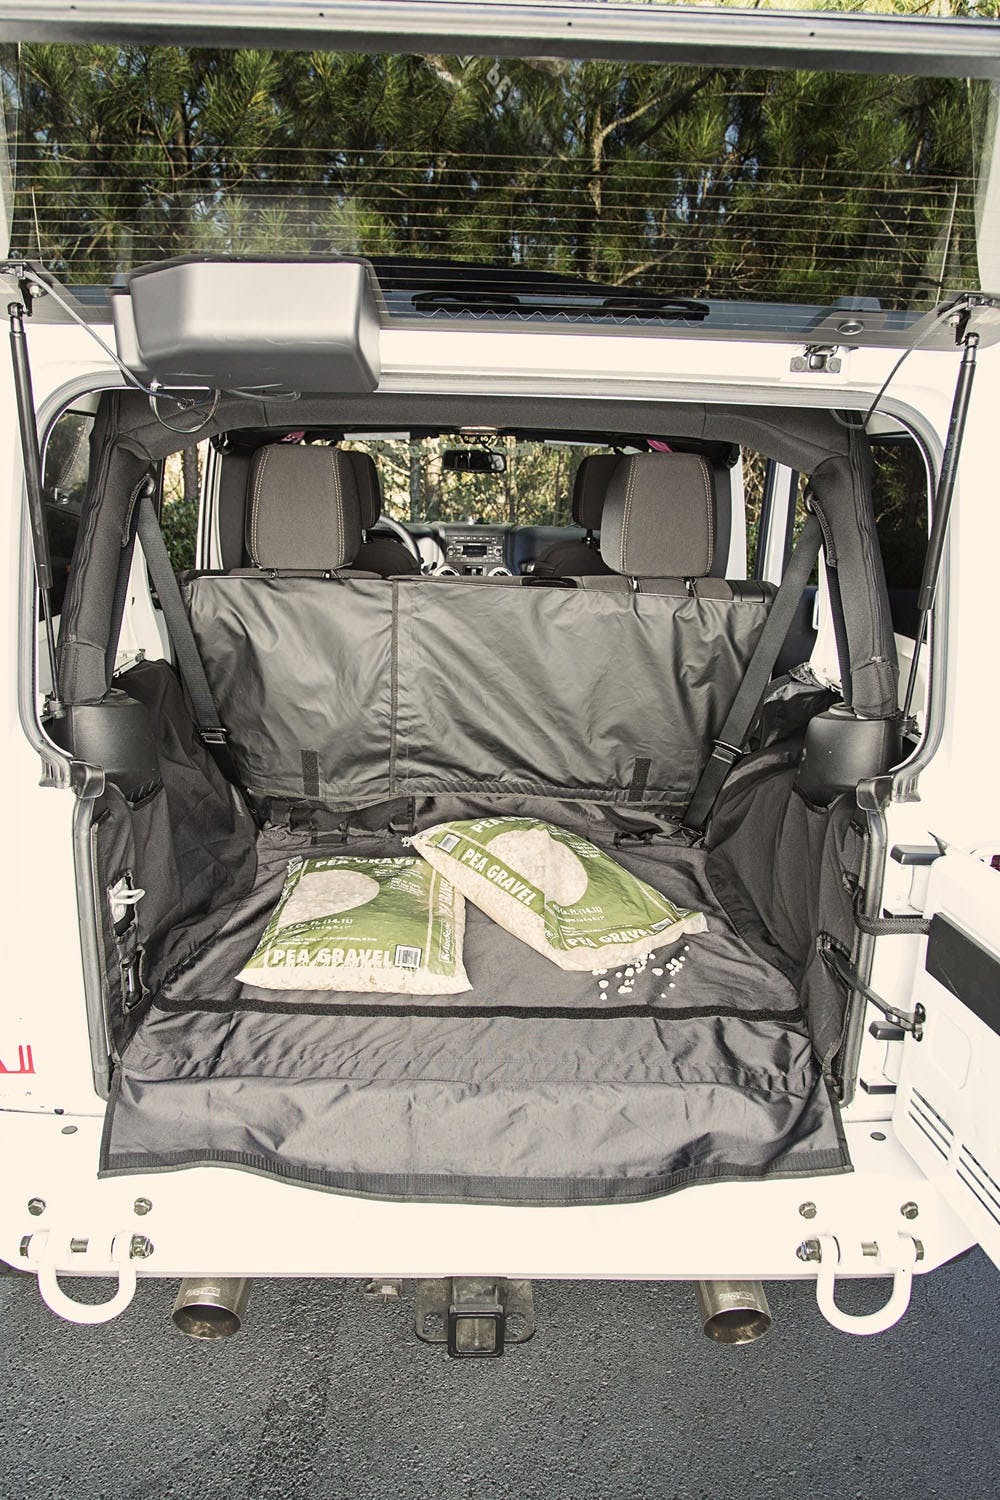 Rugged Ridge 13260.01 C3 Cargo Cover without Subwoofer